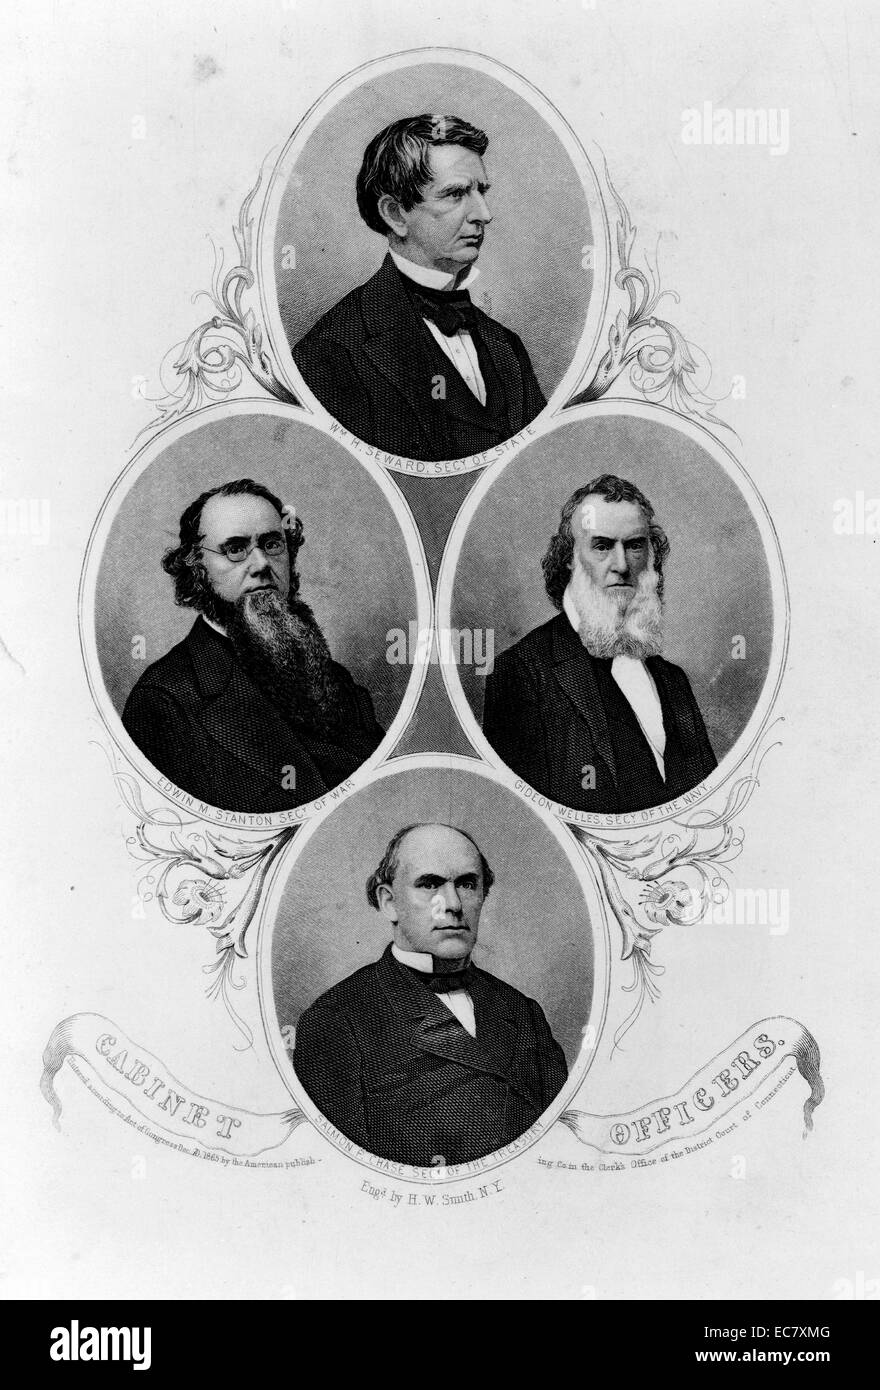 Lincoln cabinet officers: William H. Seward, Secy. of State, Edwin M. Stanton, Secy. of War, Gideon Welles, Secy. of the Navy, Salmon P. Chase, Secy. of the Treasury. Stock Photo